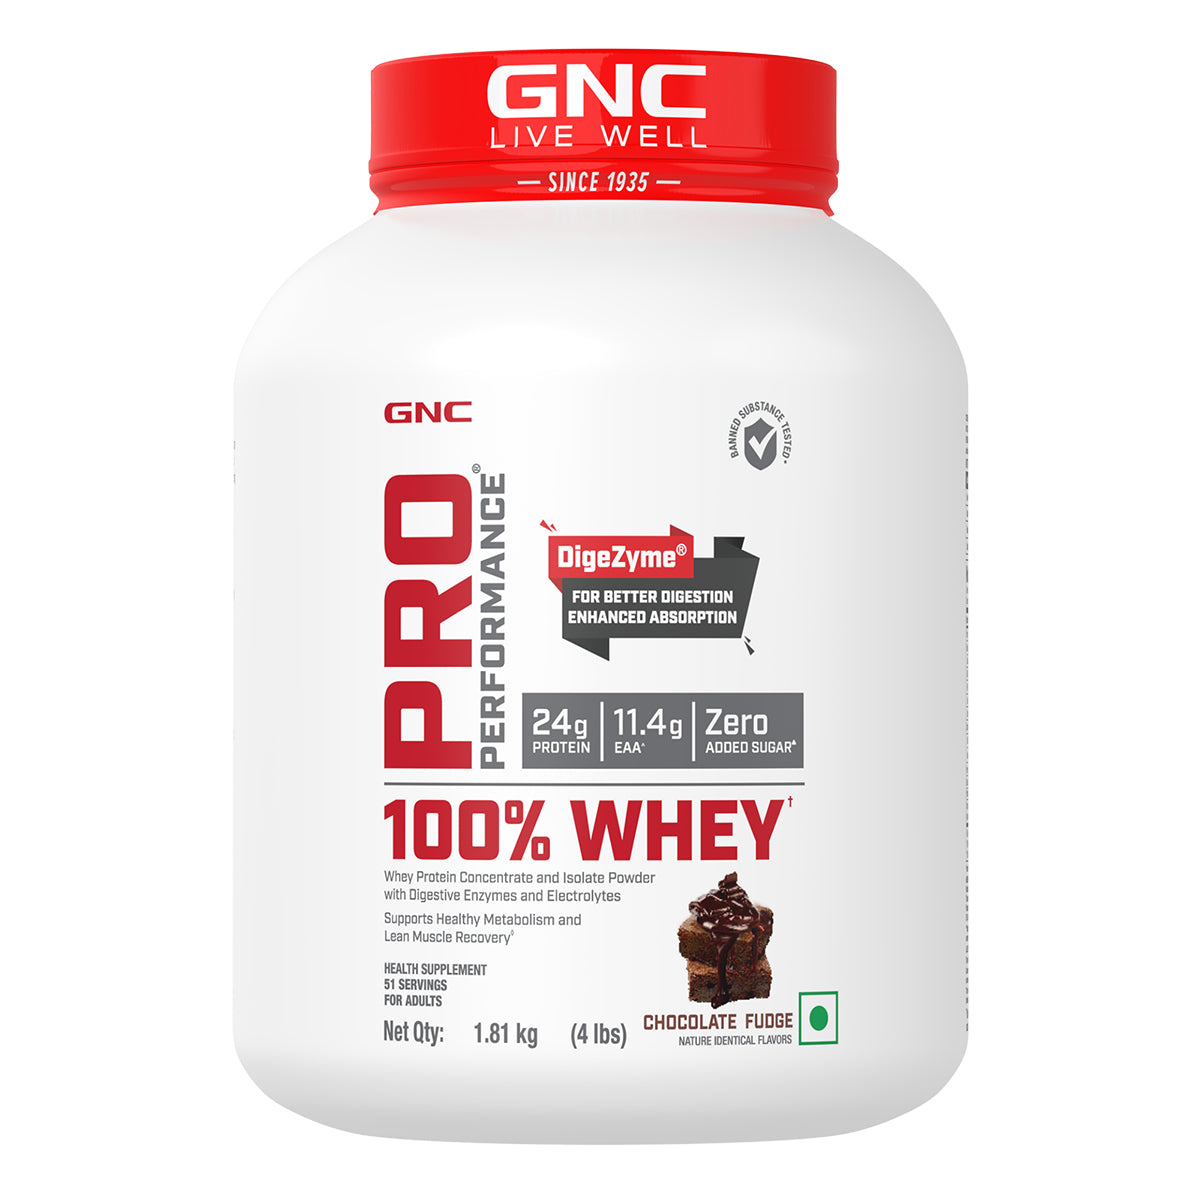 GNC Pro Performance 100% Whey Protein 4 lbs with Gym Kit - Faster Recovery & Lean Muscle Gains | Informed Choice Certified